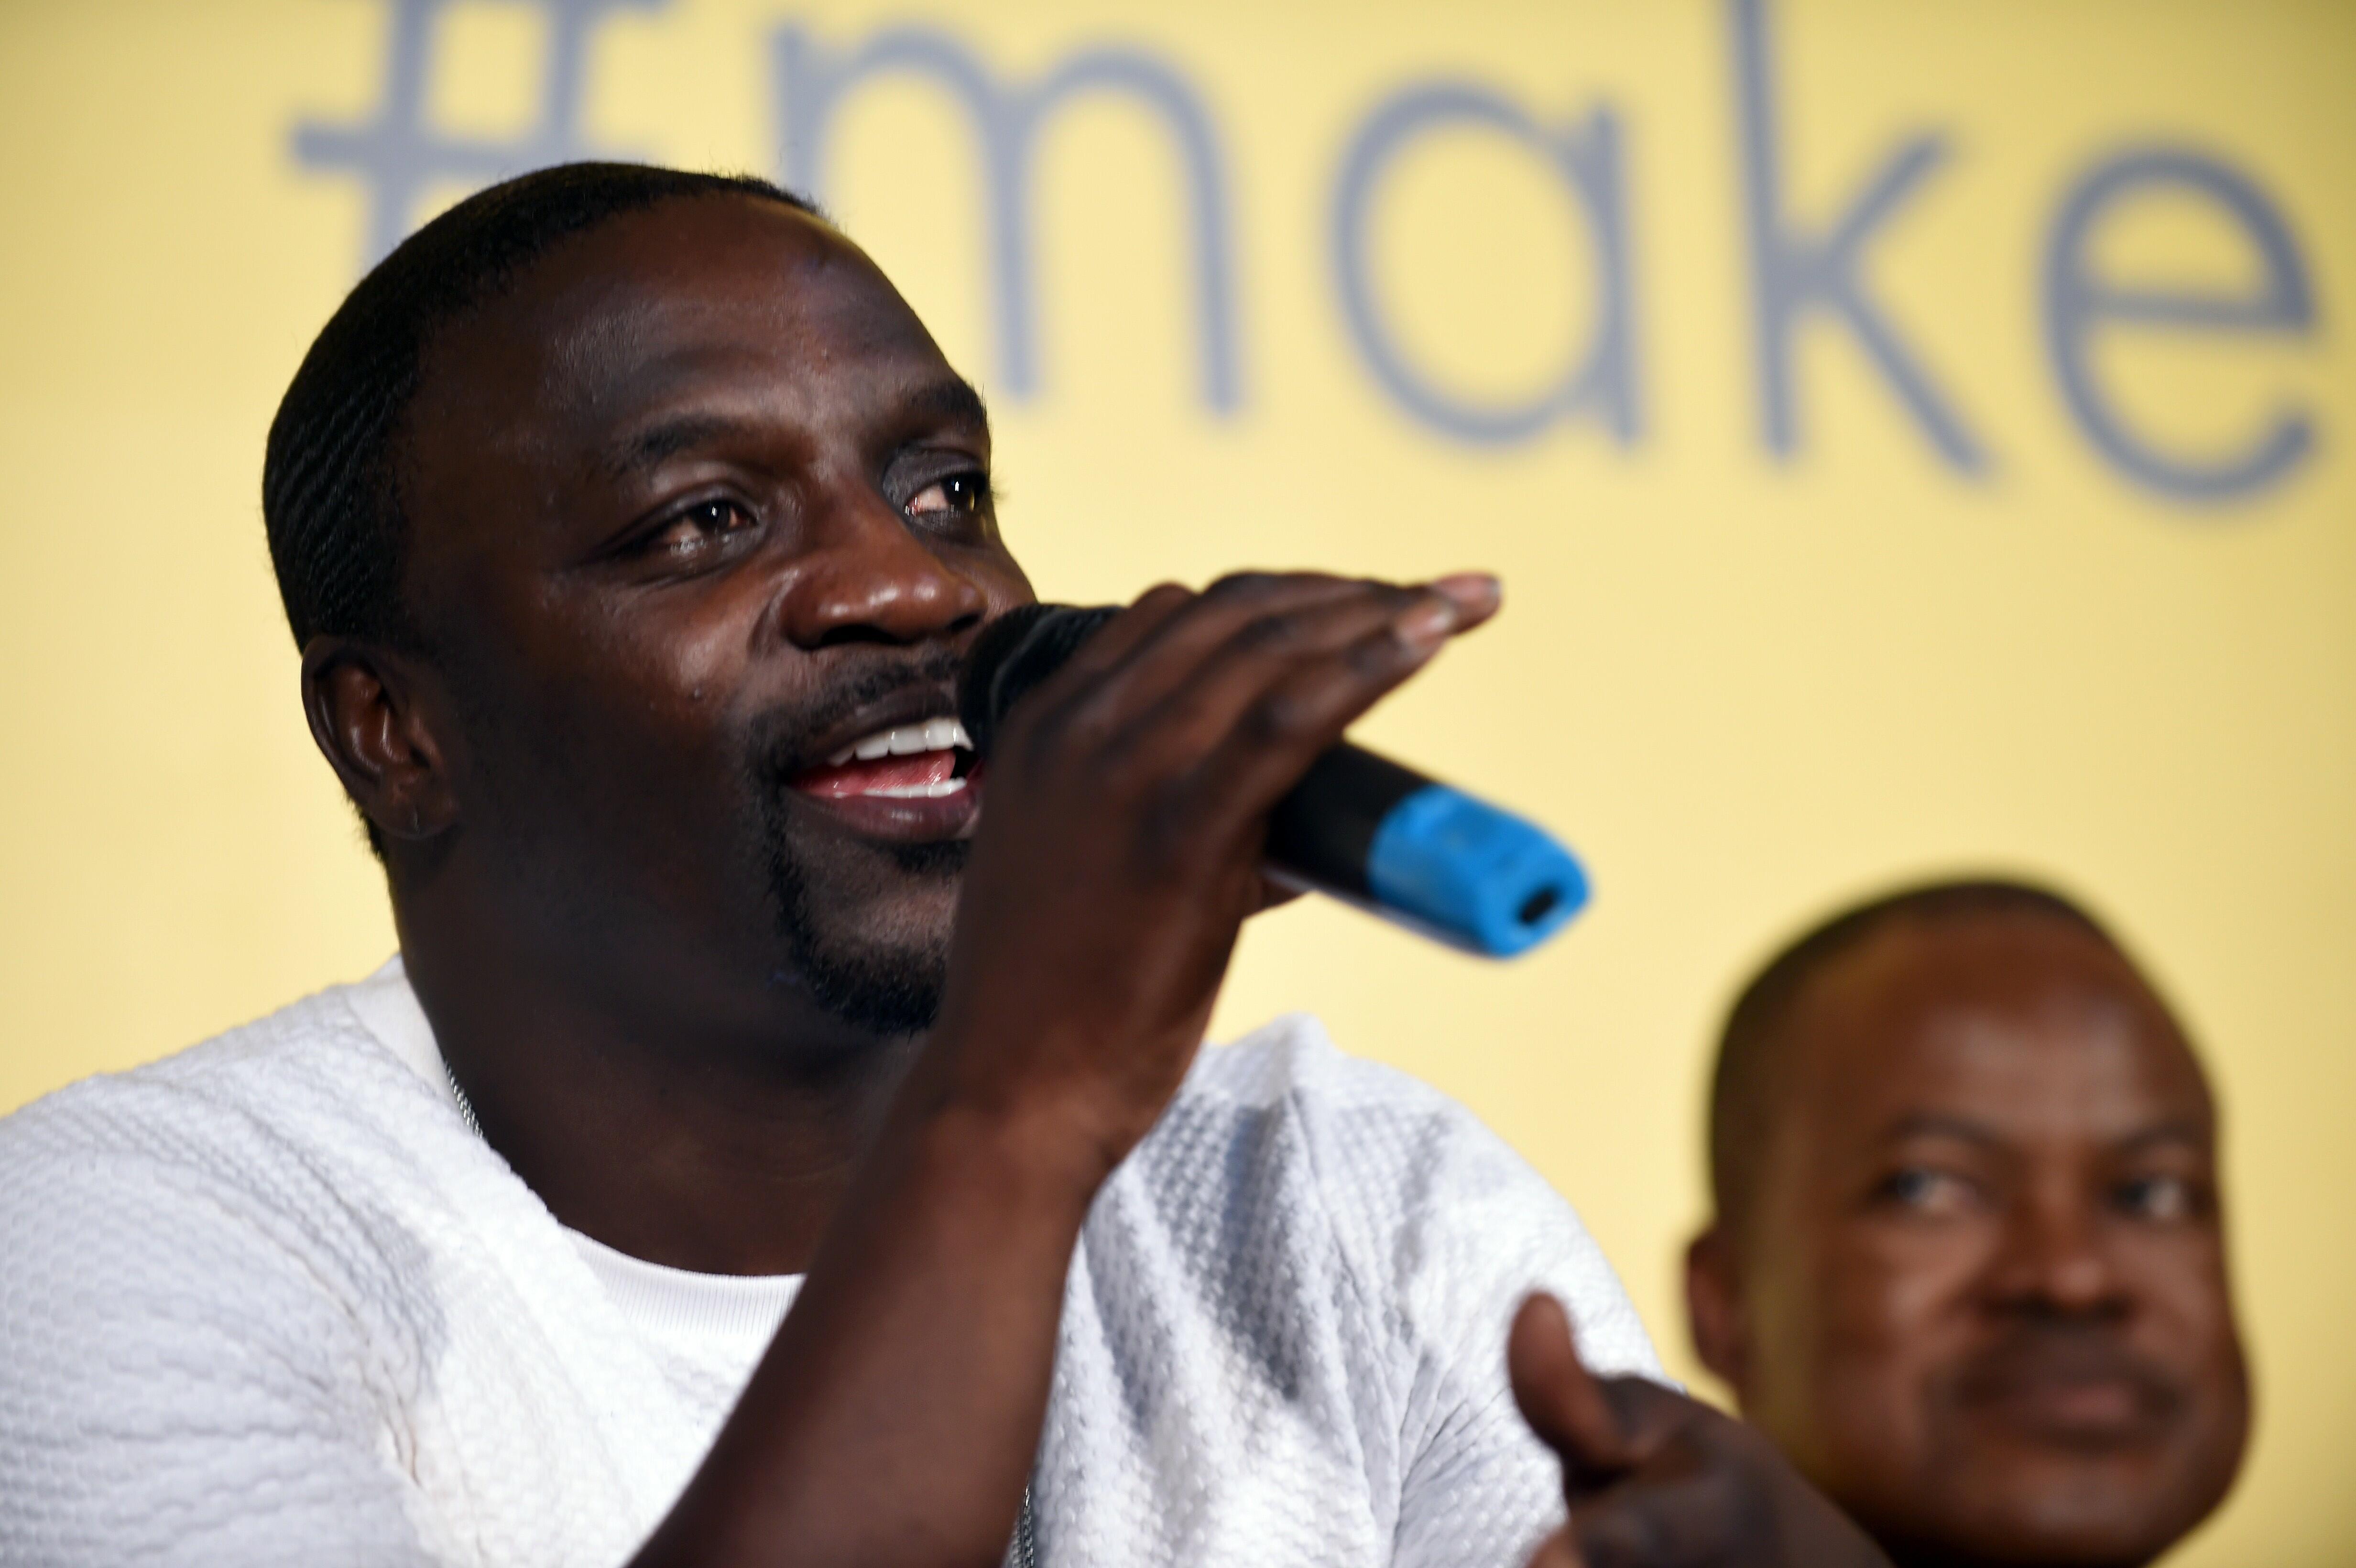 Rapper and songwriter Akon speaks during the unveiling ceremony of the Africa's first kinetic football pitch in Lagos, on December 10, 2015. The pitch combines solar energy with innovative technology  that harnesses the energy of player's movement and con